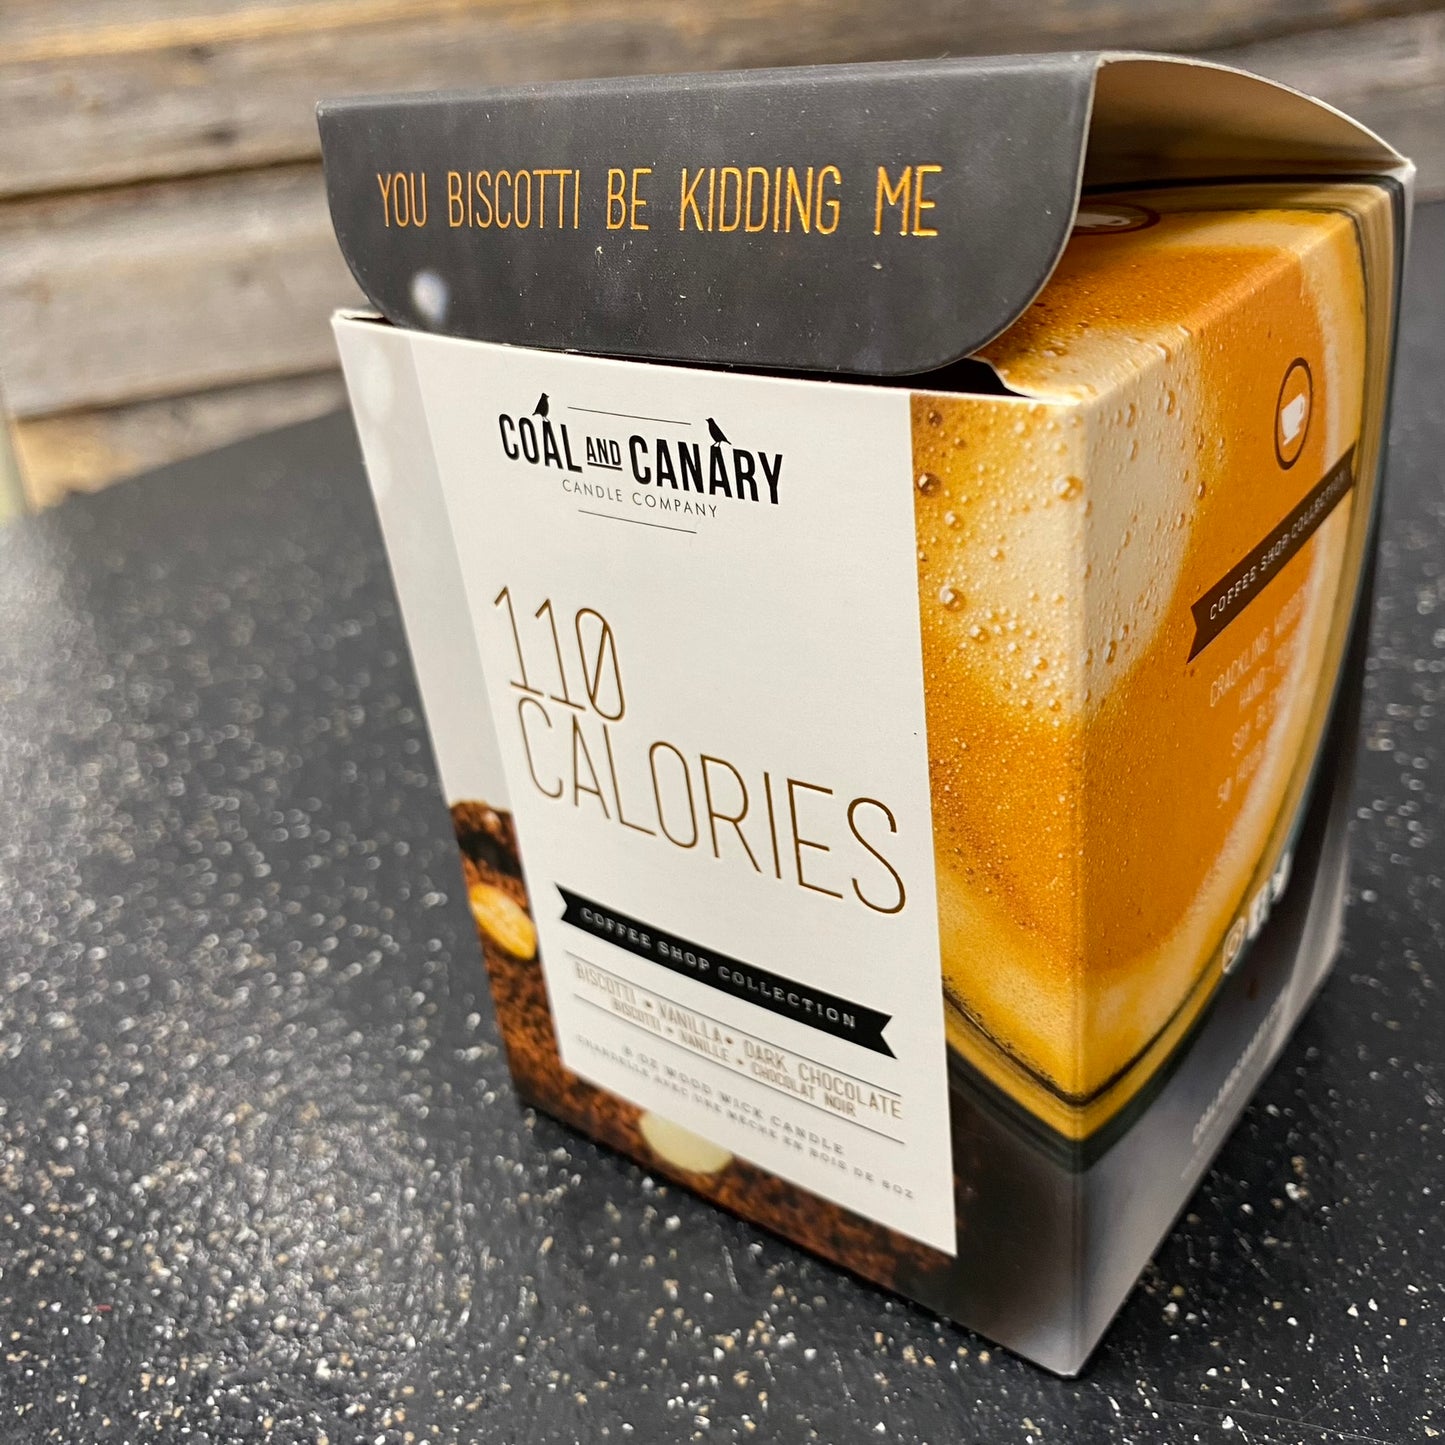 110 Calories by Coal & Canary